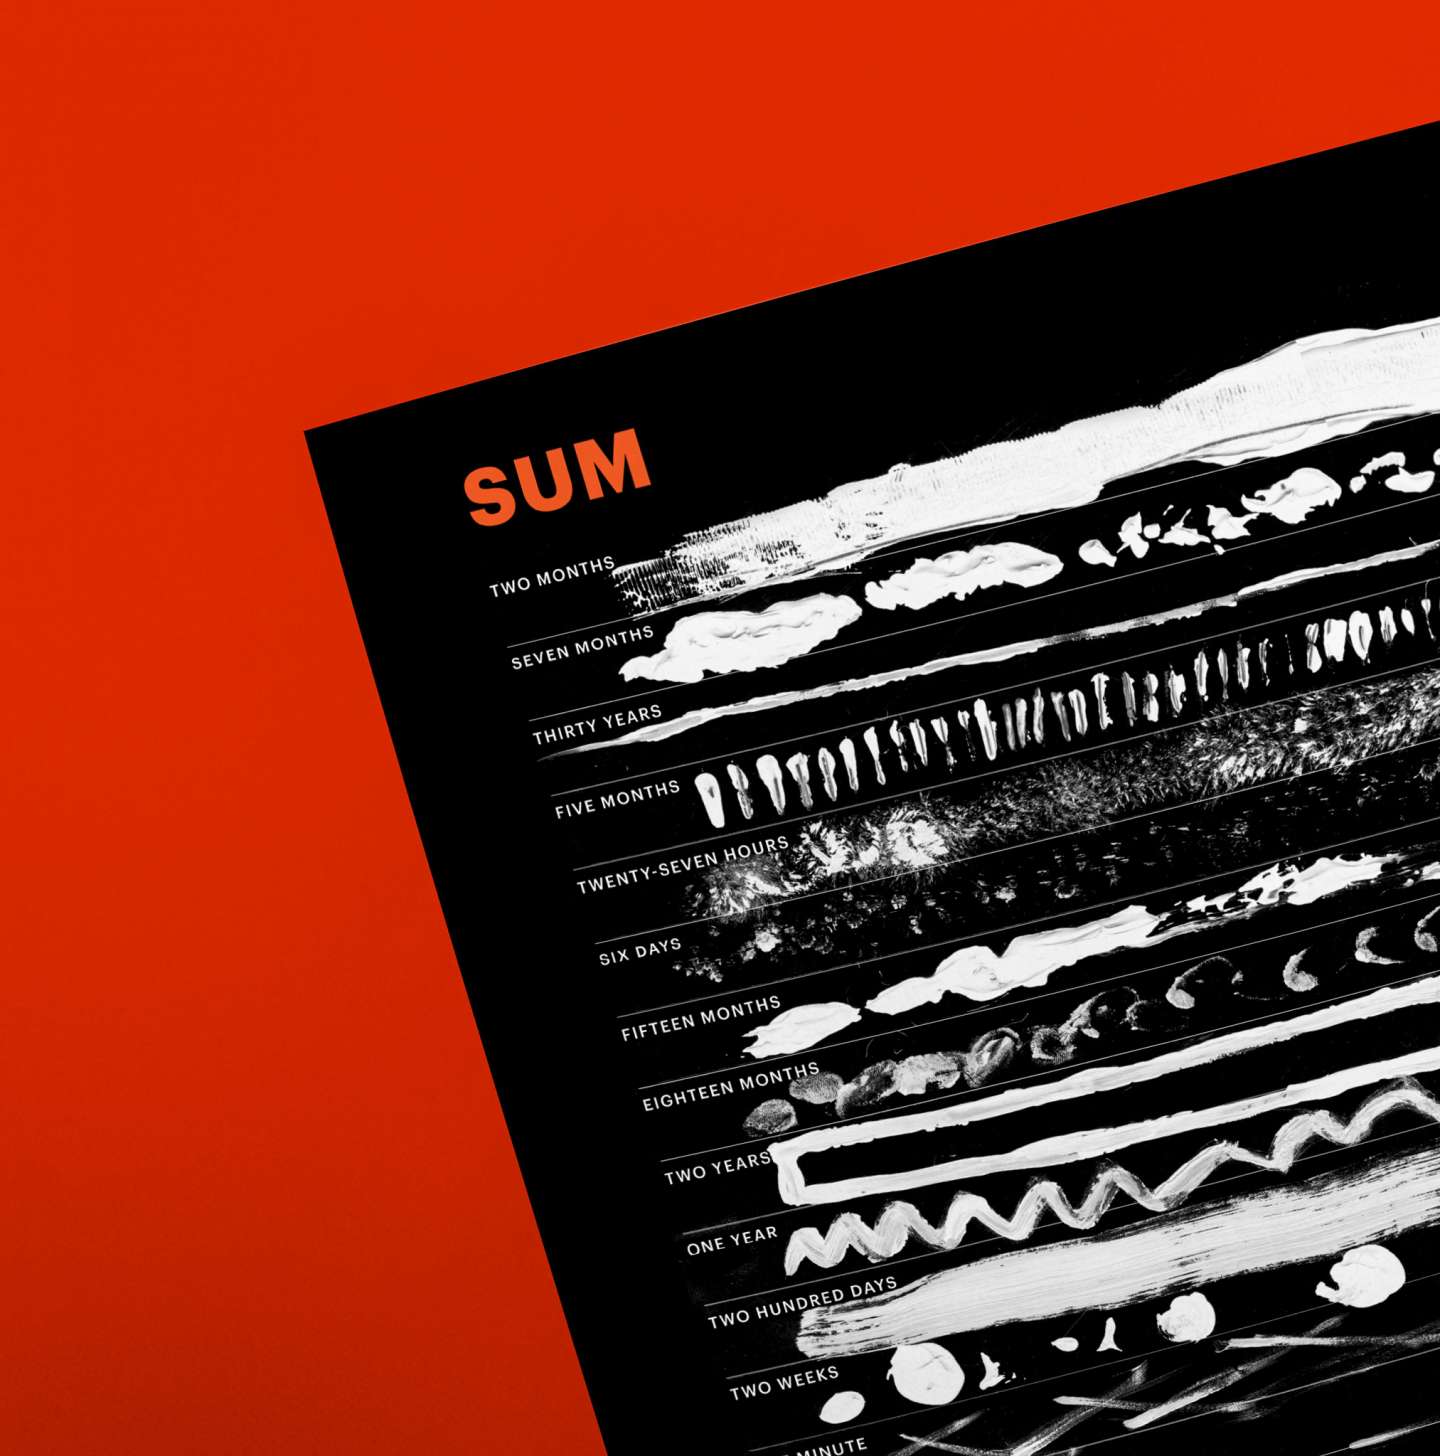 Sum: An Experimental Infographic